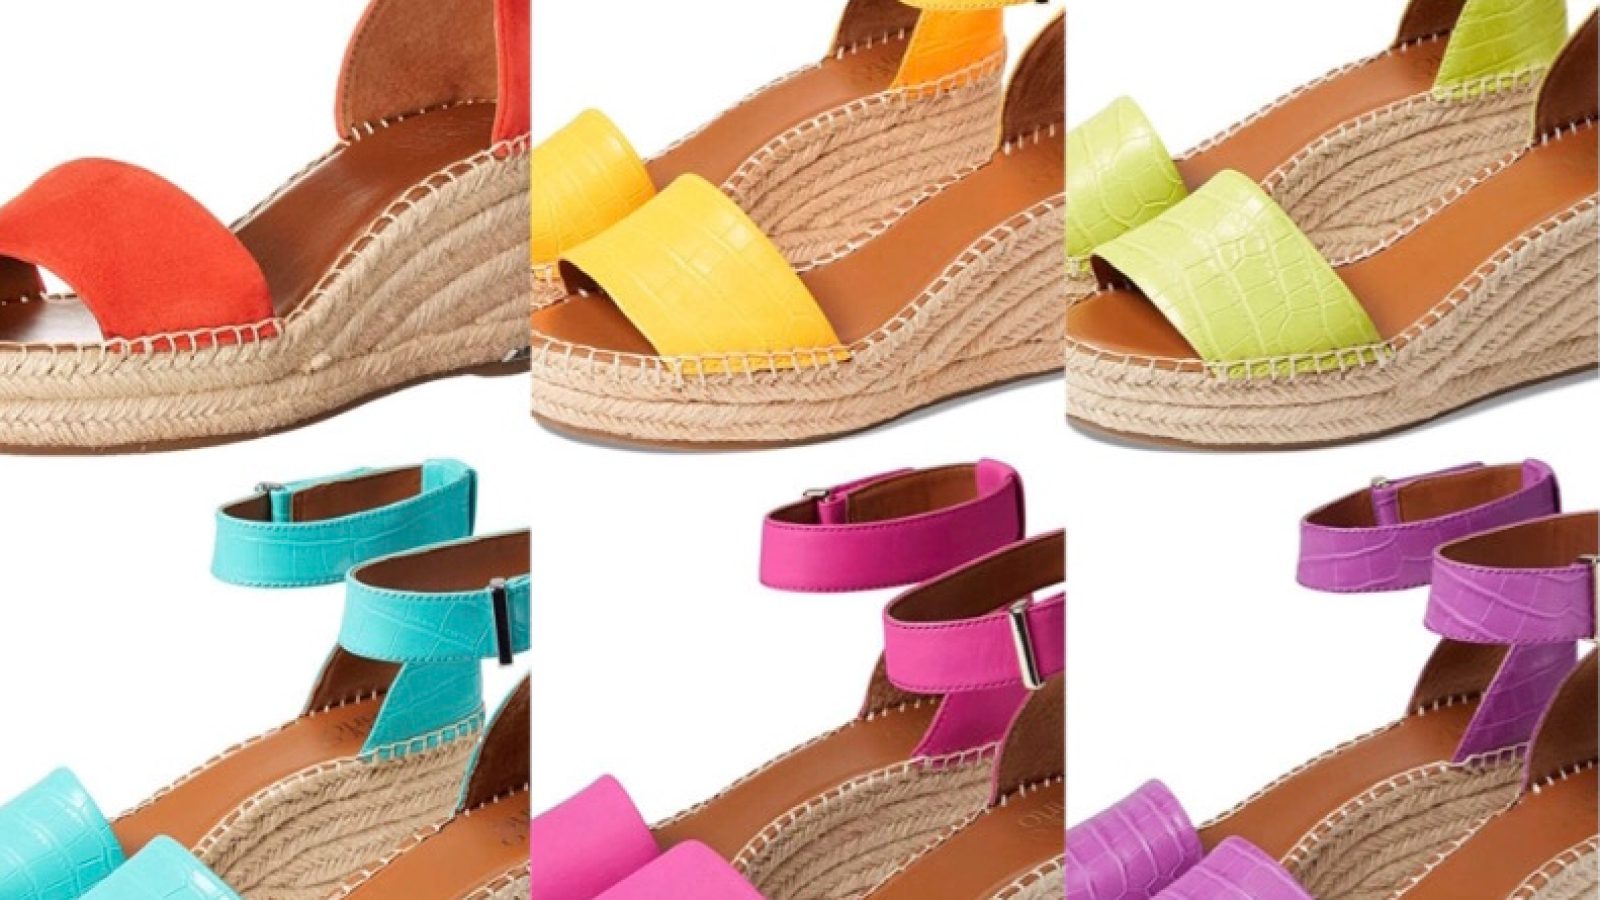 Espadrilles For Spring and Summer: 17 Stylish and Comfy Outfit Ideas